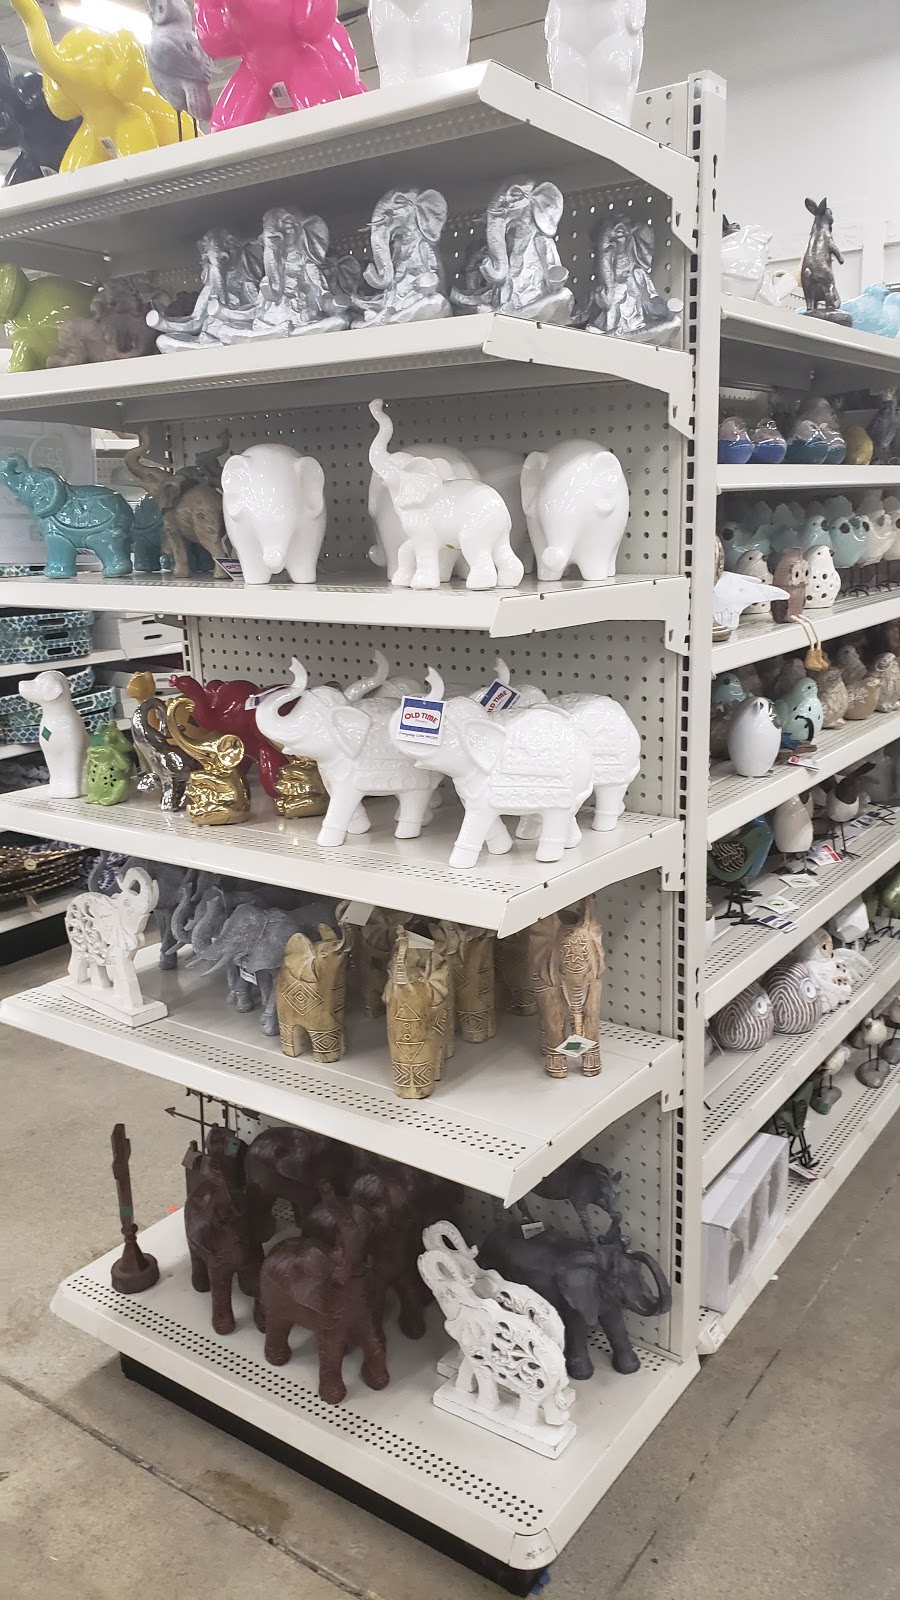 Old Time Pottery | 1935 N Neltnor Blvd, West Chicago, IL 60185 | Phone: (630) 957-5512